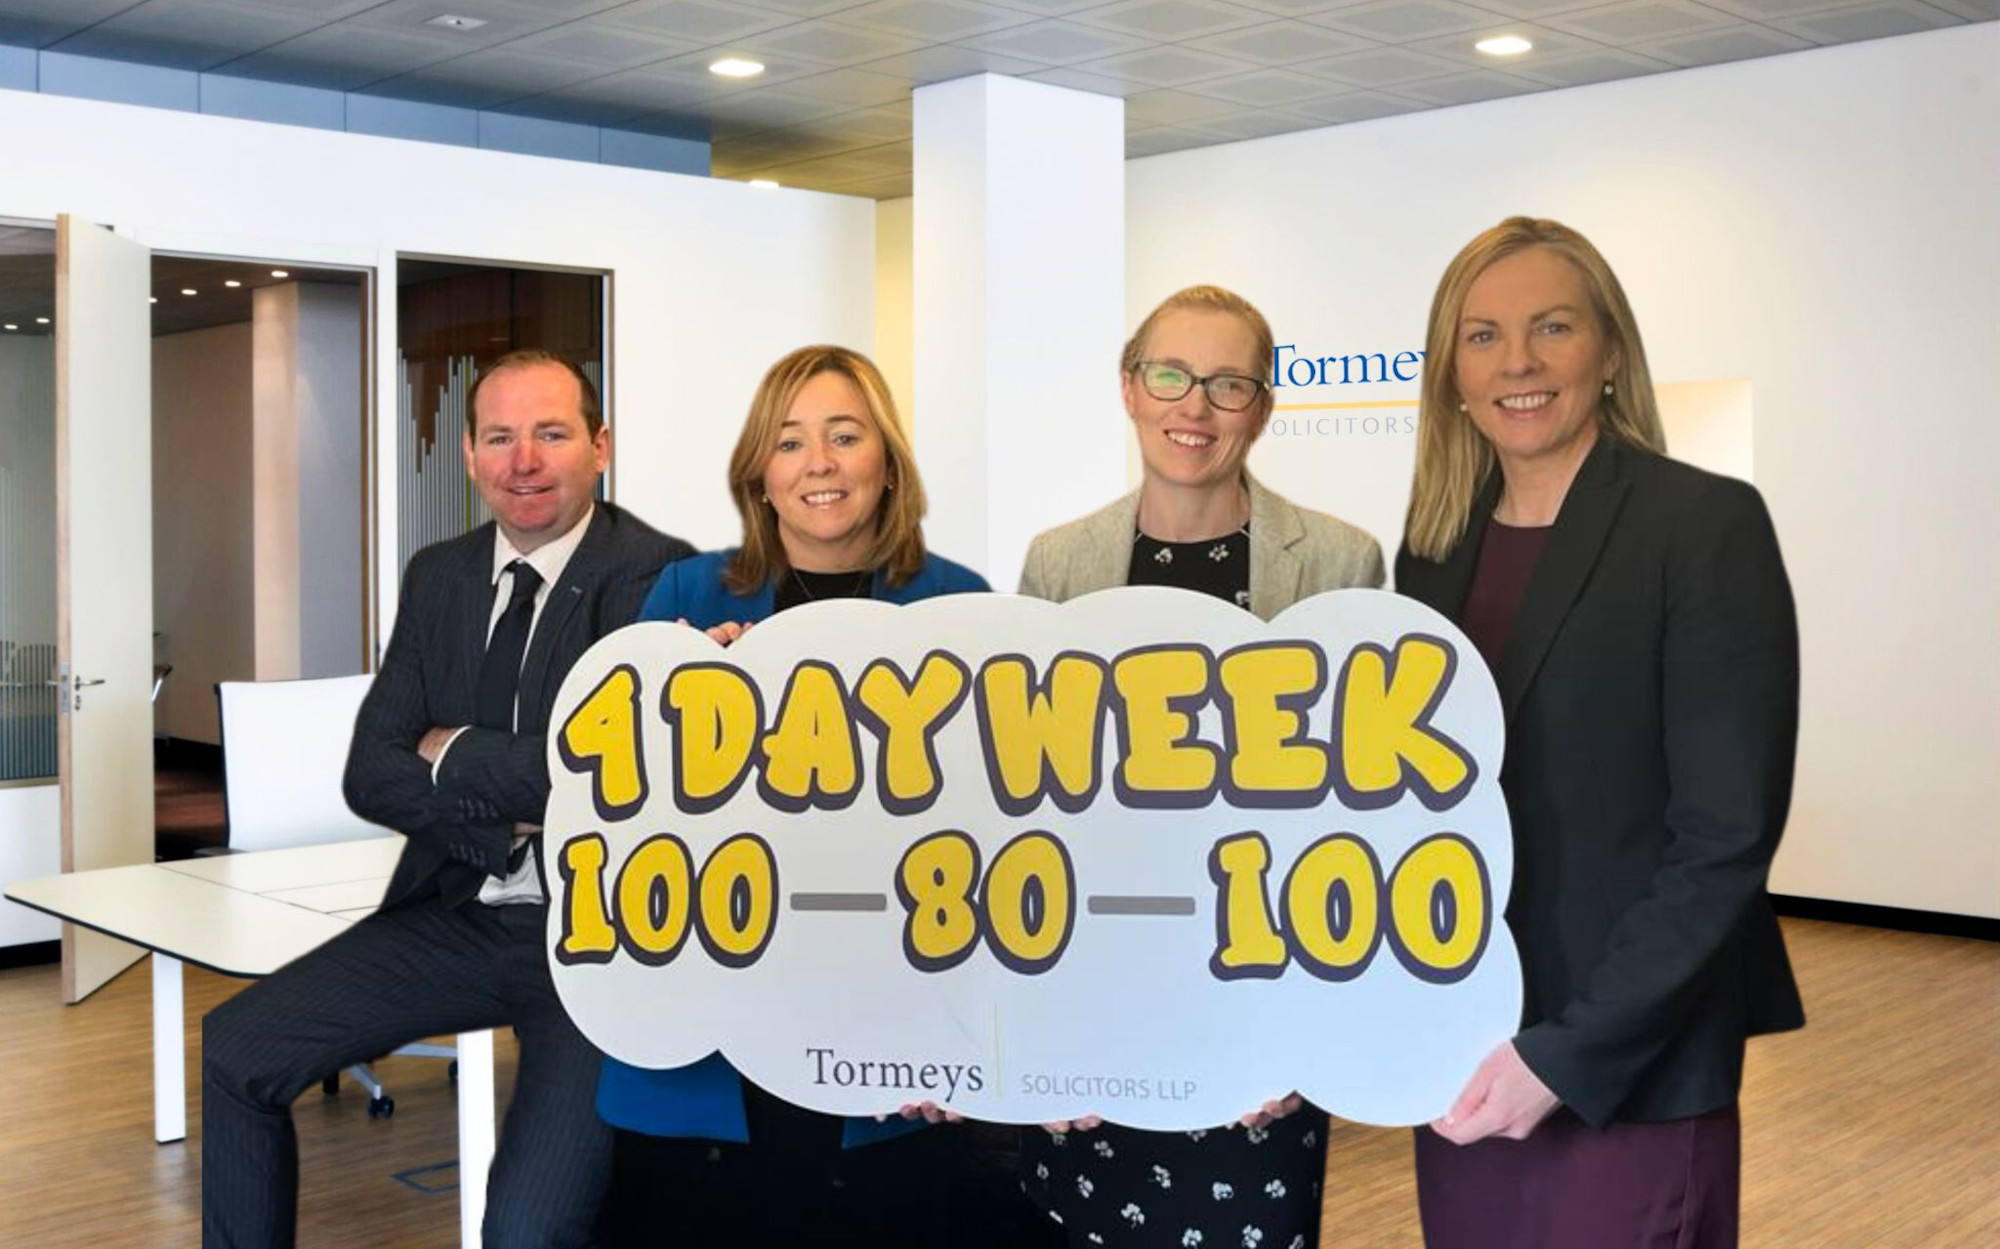 Tormeys Solicitors joins four-day week pilot